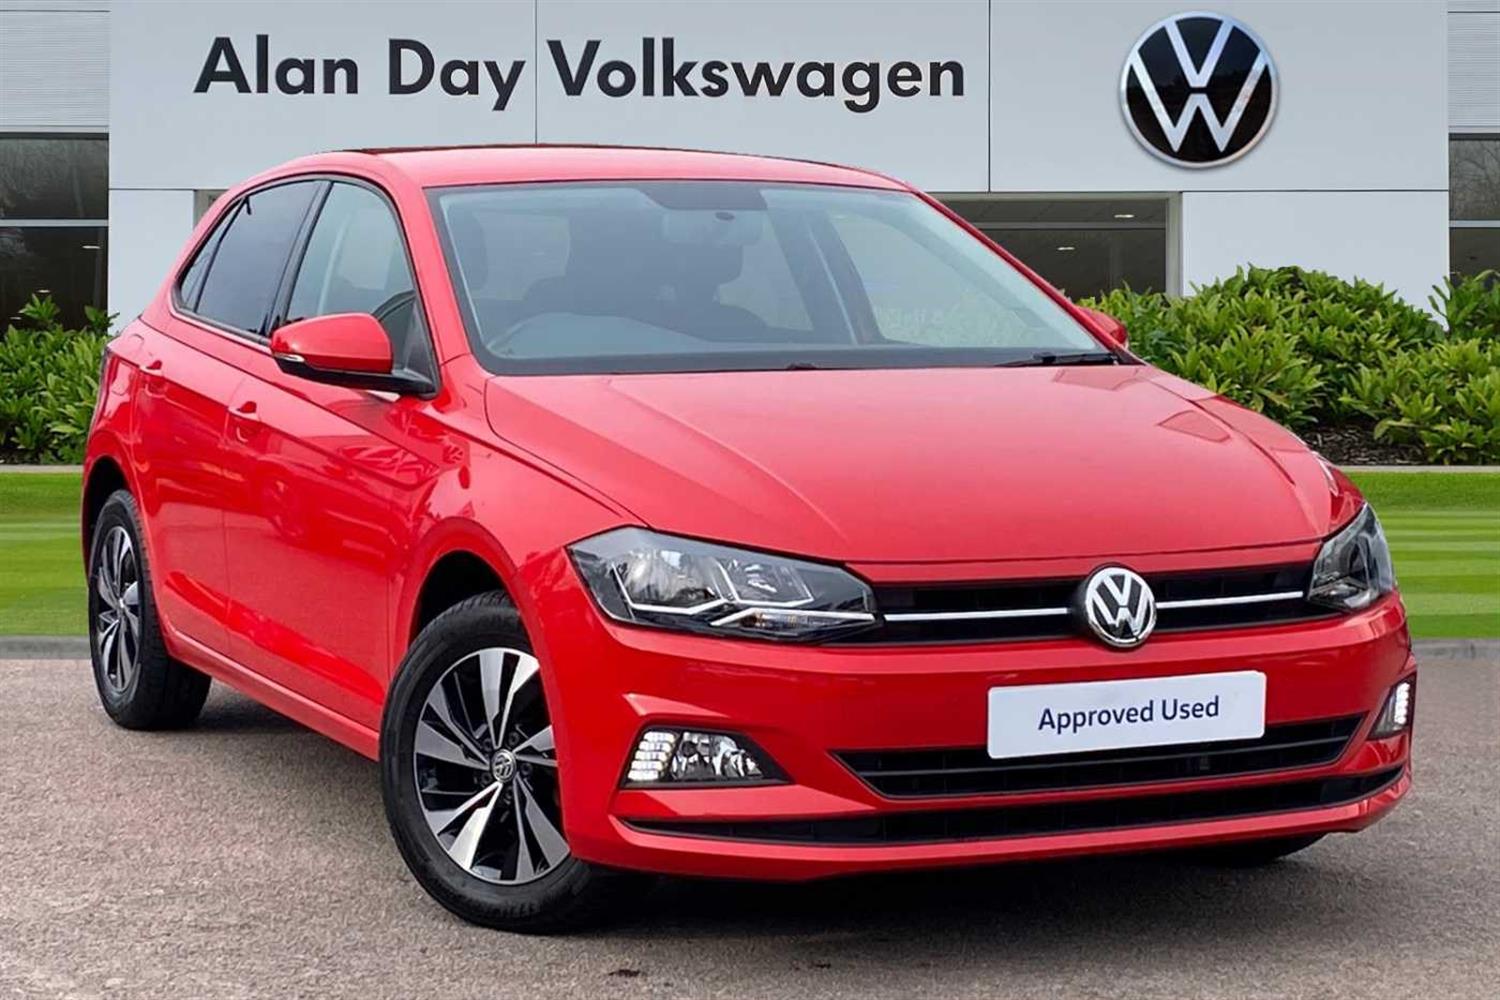 Alan Day Group - 2020 Volkswagen Polo 1.0 TSI 95PS Match | Alan Day Group